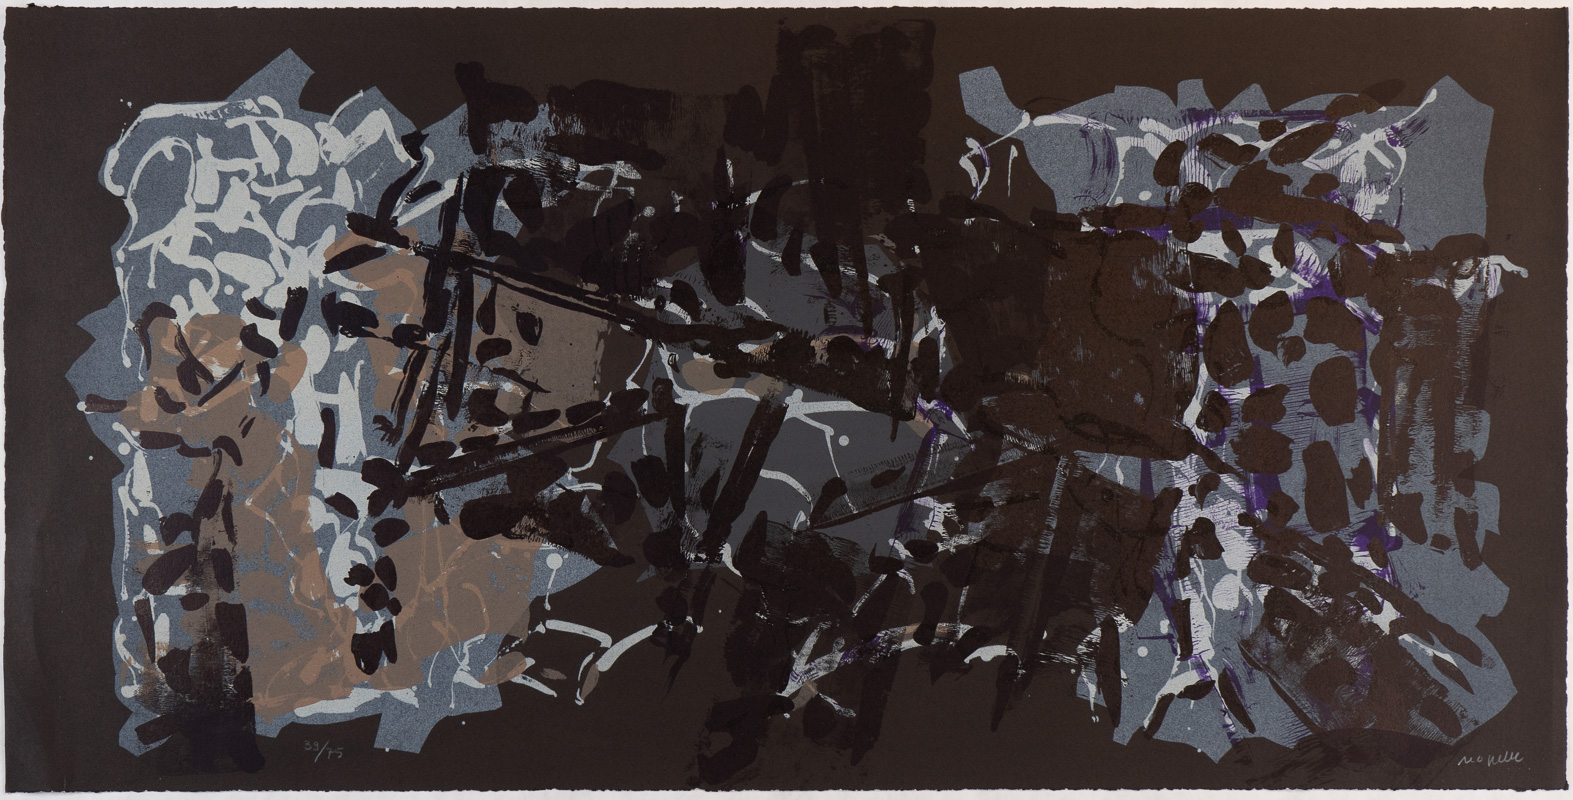 Lithograph from album "Riopelle" 1967